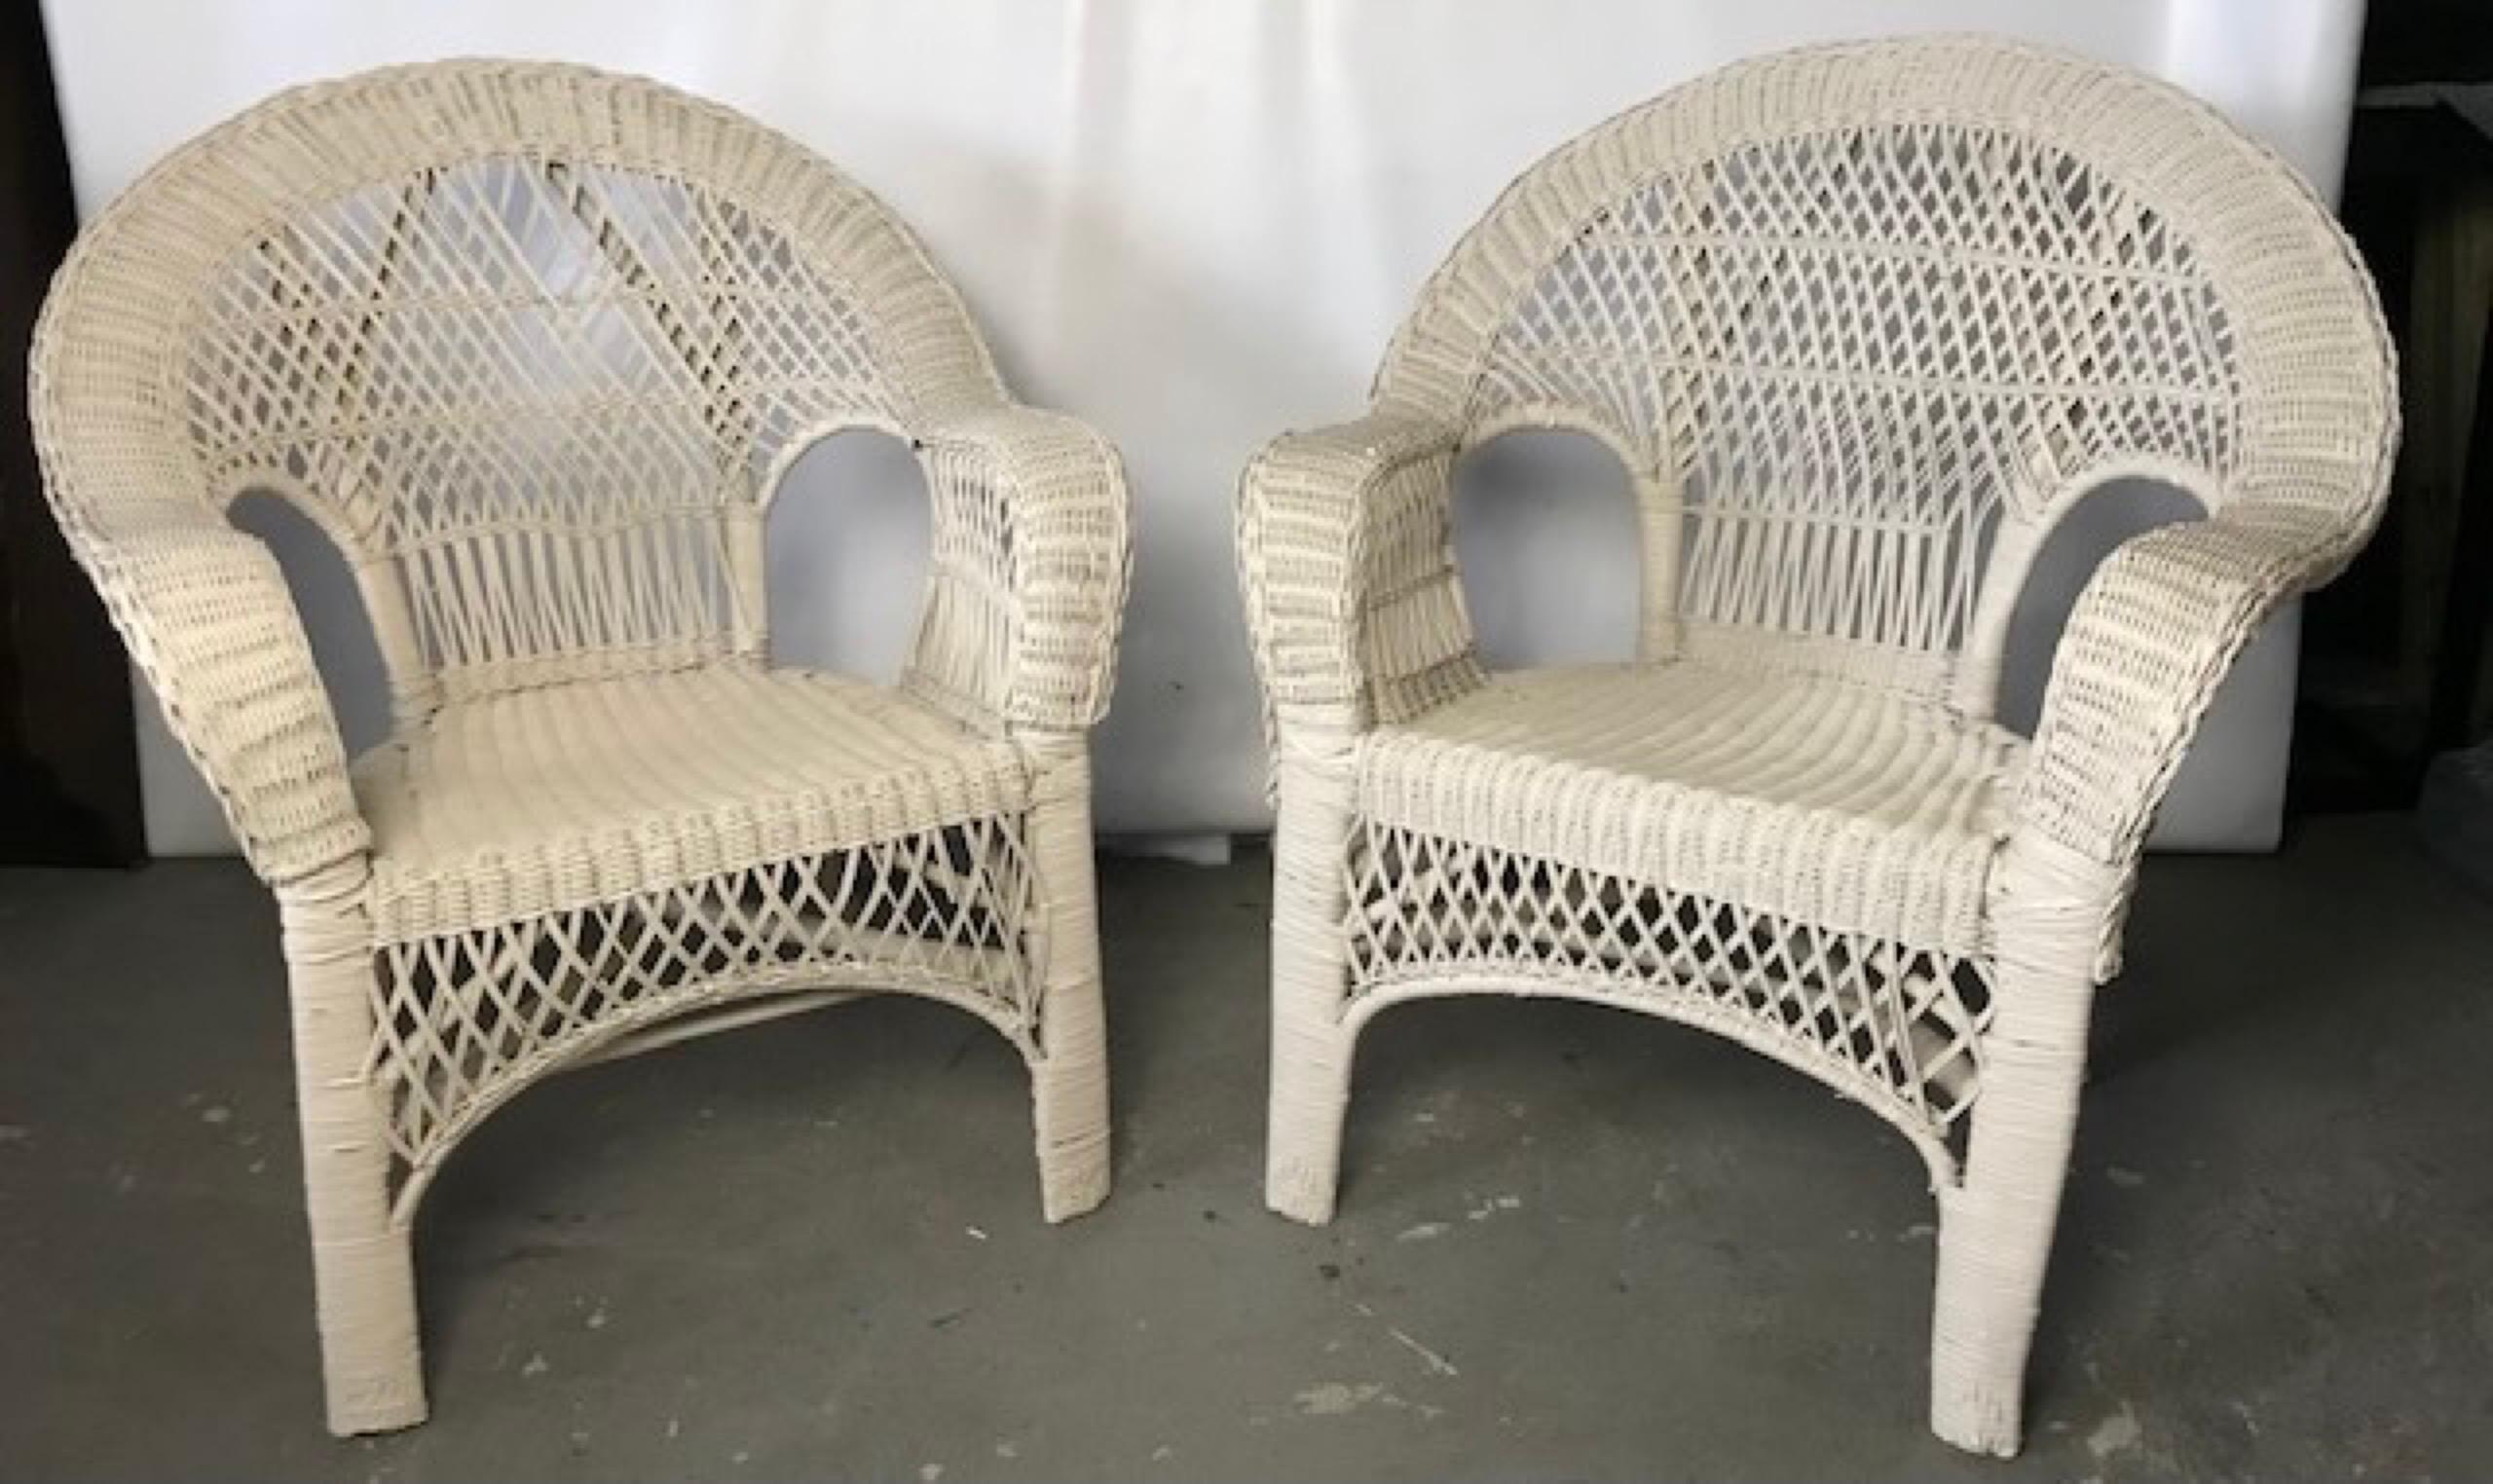 Pair of American Victorian style white painted wicker fan back armchairs featuring lattice design back and seat apron with a rounded back and flat arms in the tradition of Heywood Wakefield, deco-inspired Mid-Century Modern furniture. Great on a